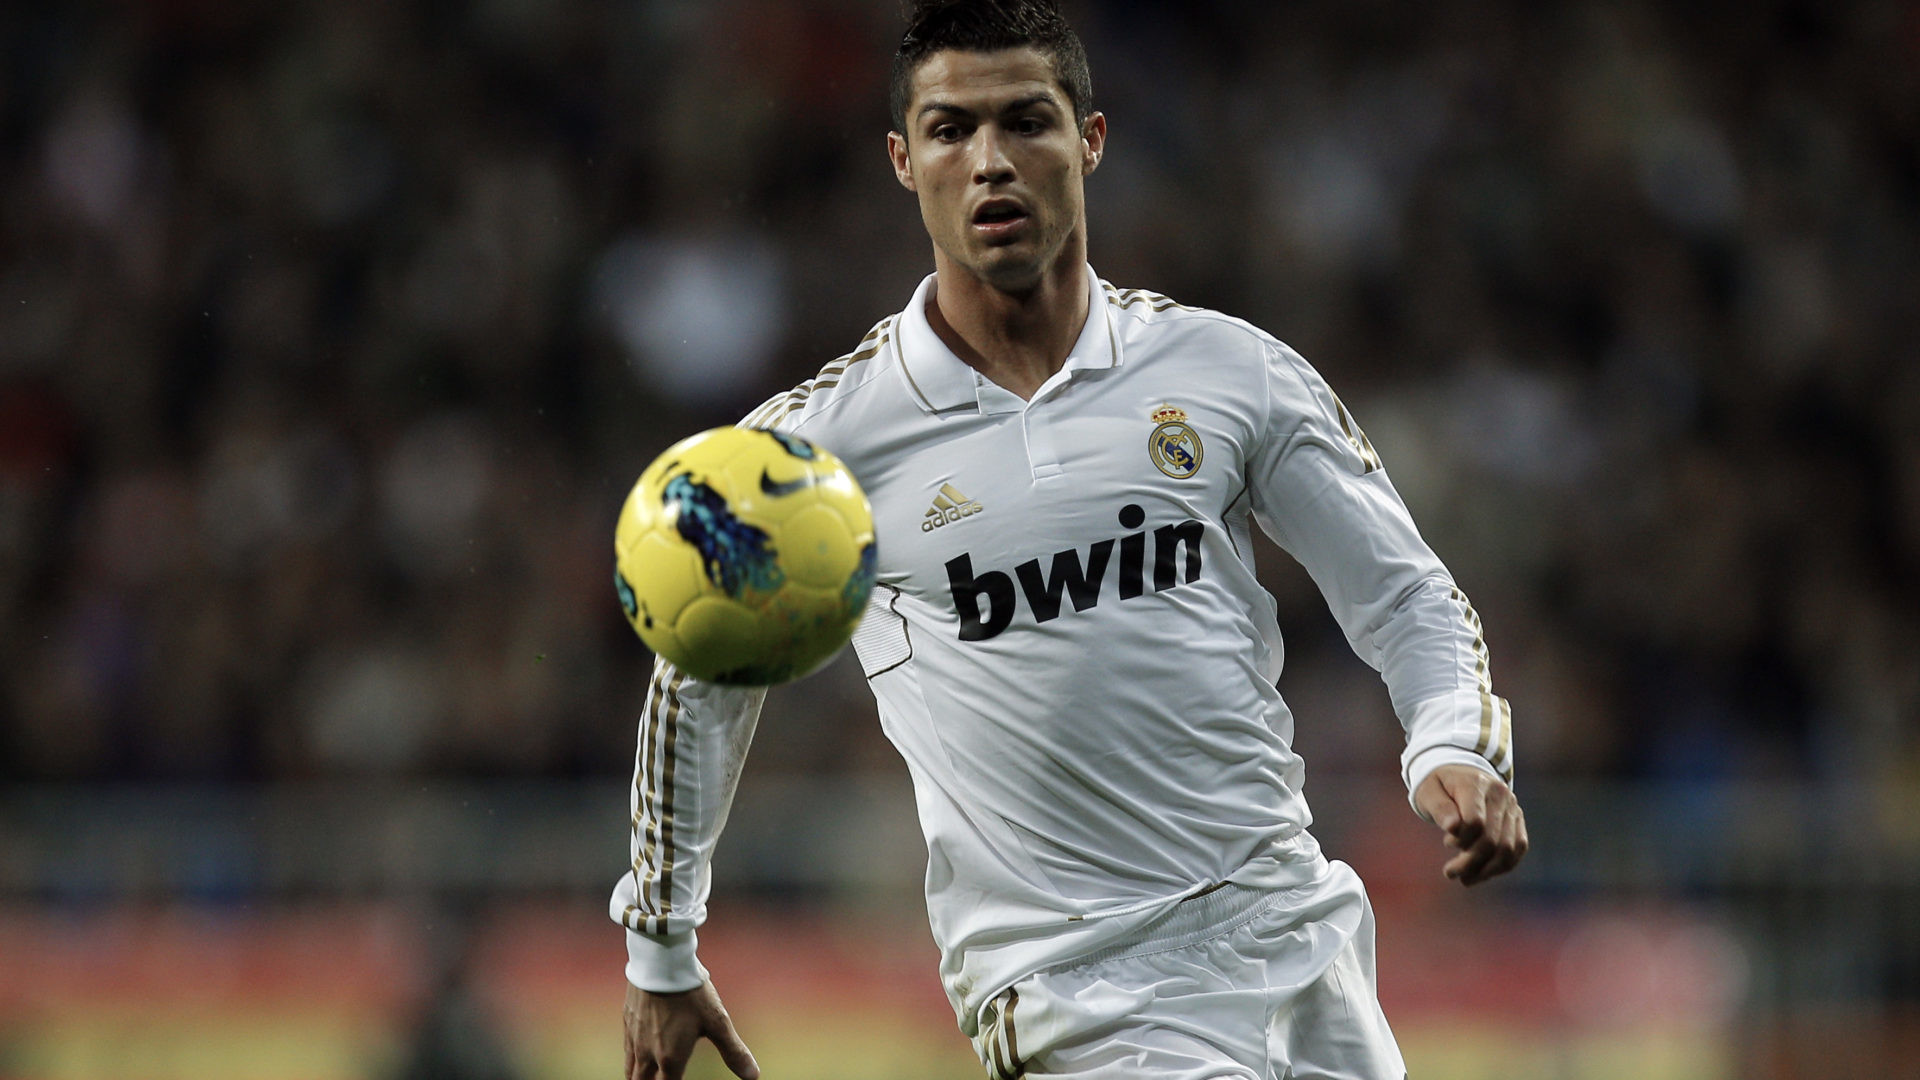 1920x1080 Cristiano Ronaldo HD Images, Pictures